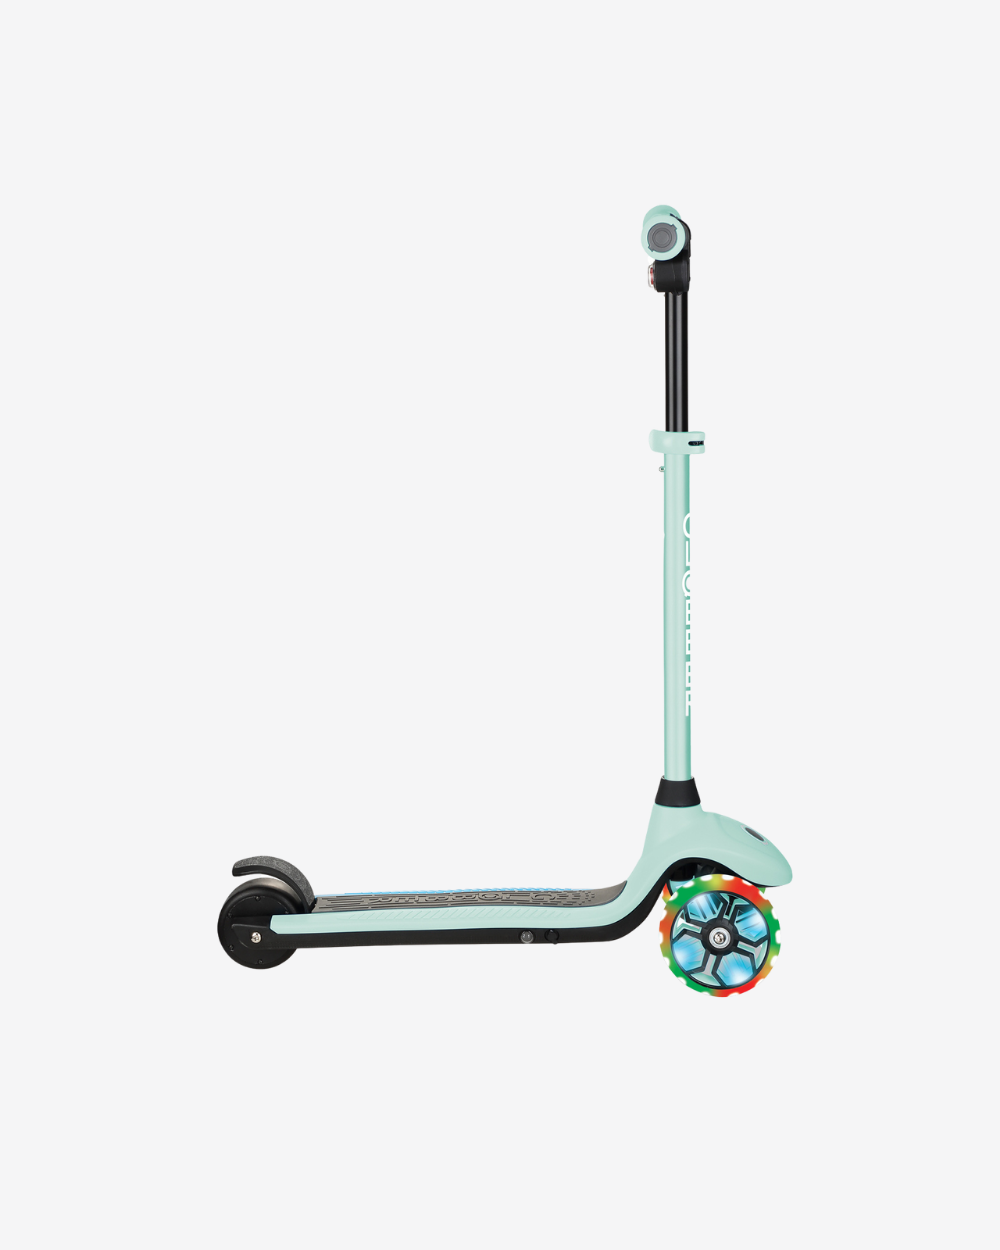 Globber ONE K E-MOTION 4 PLUS Electric 3 Wheel Scooter | Mint